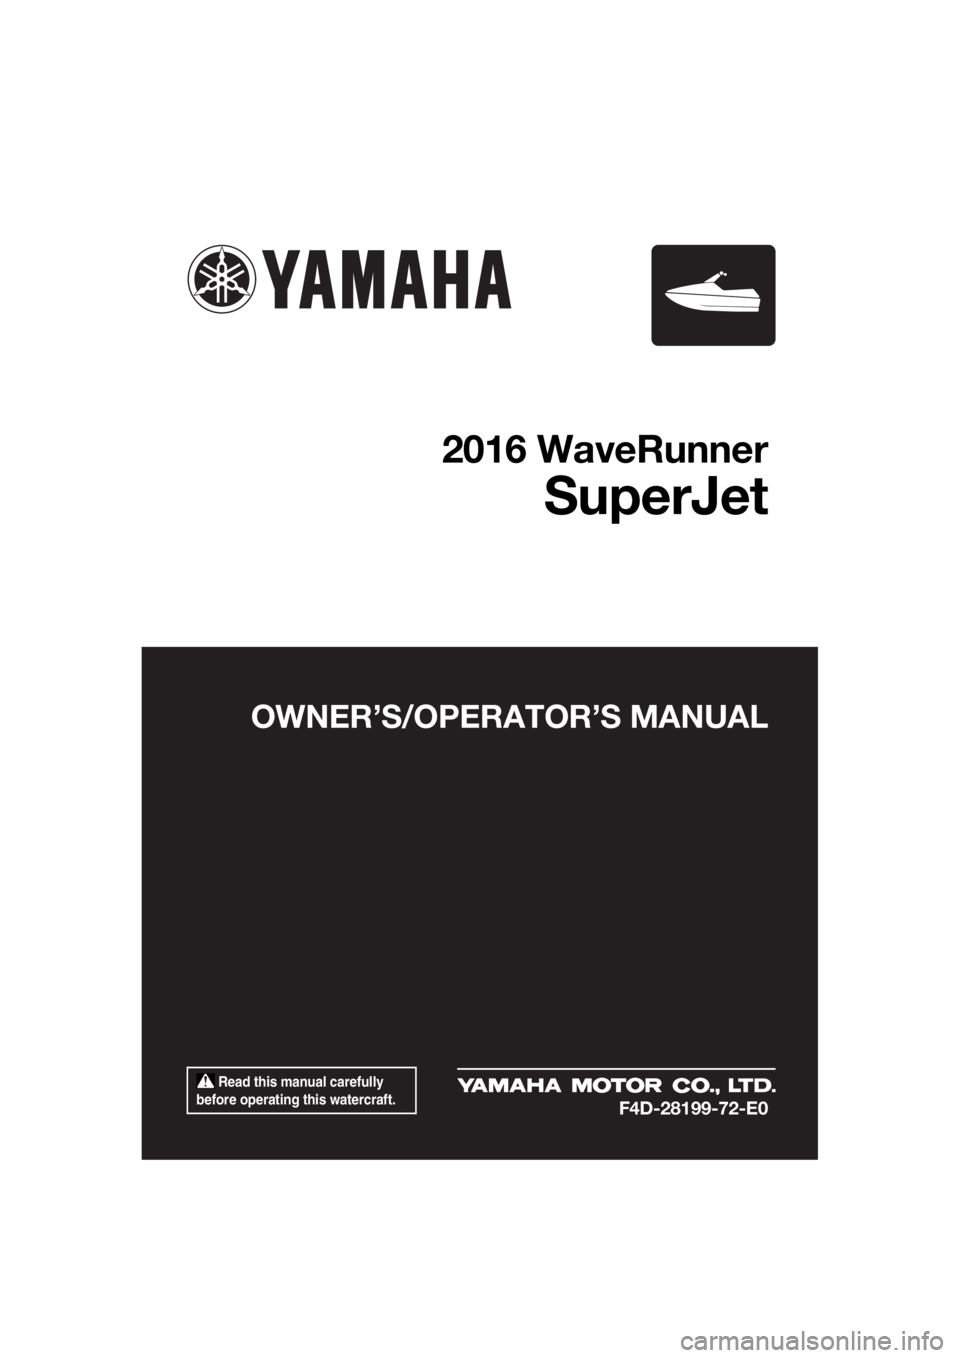 YAMAHA SUPERJET 2016  Owners Manual  Read this manual carefully 
before operating this watercraft.
OWNER’S/OPERAT OR’S MANUAL
2016 WaveRunner
SuperJet
F4D-28199-72-E0
UF4D72E0.book  Page 1  Tuesday, September 1, 2015  3:23 PM 